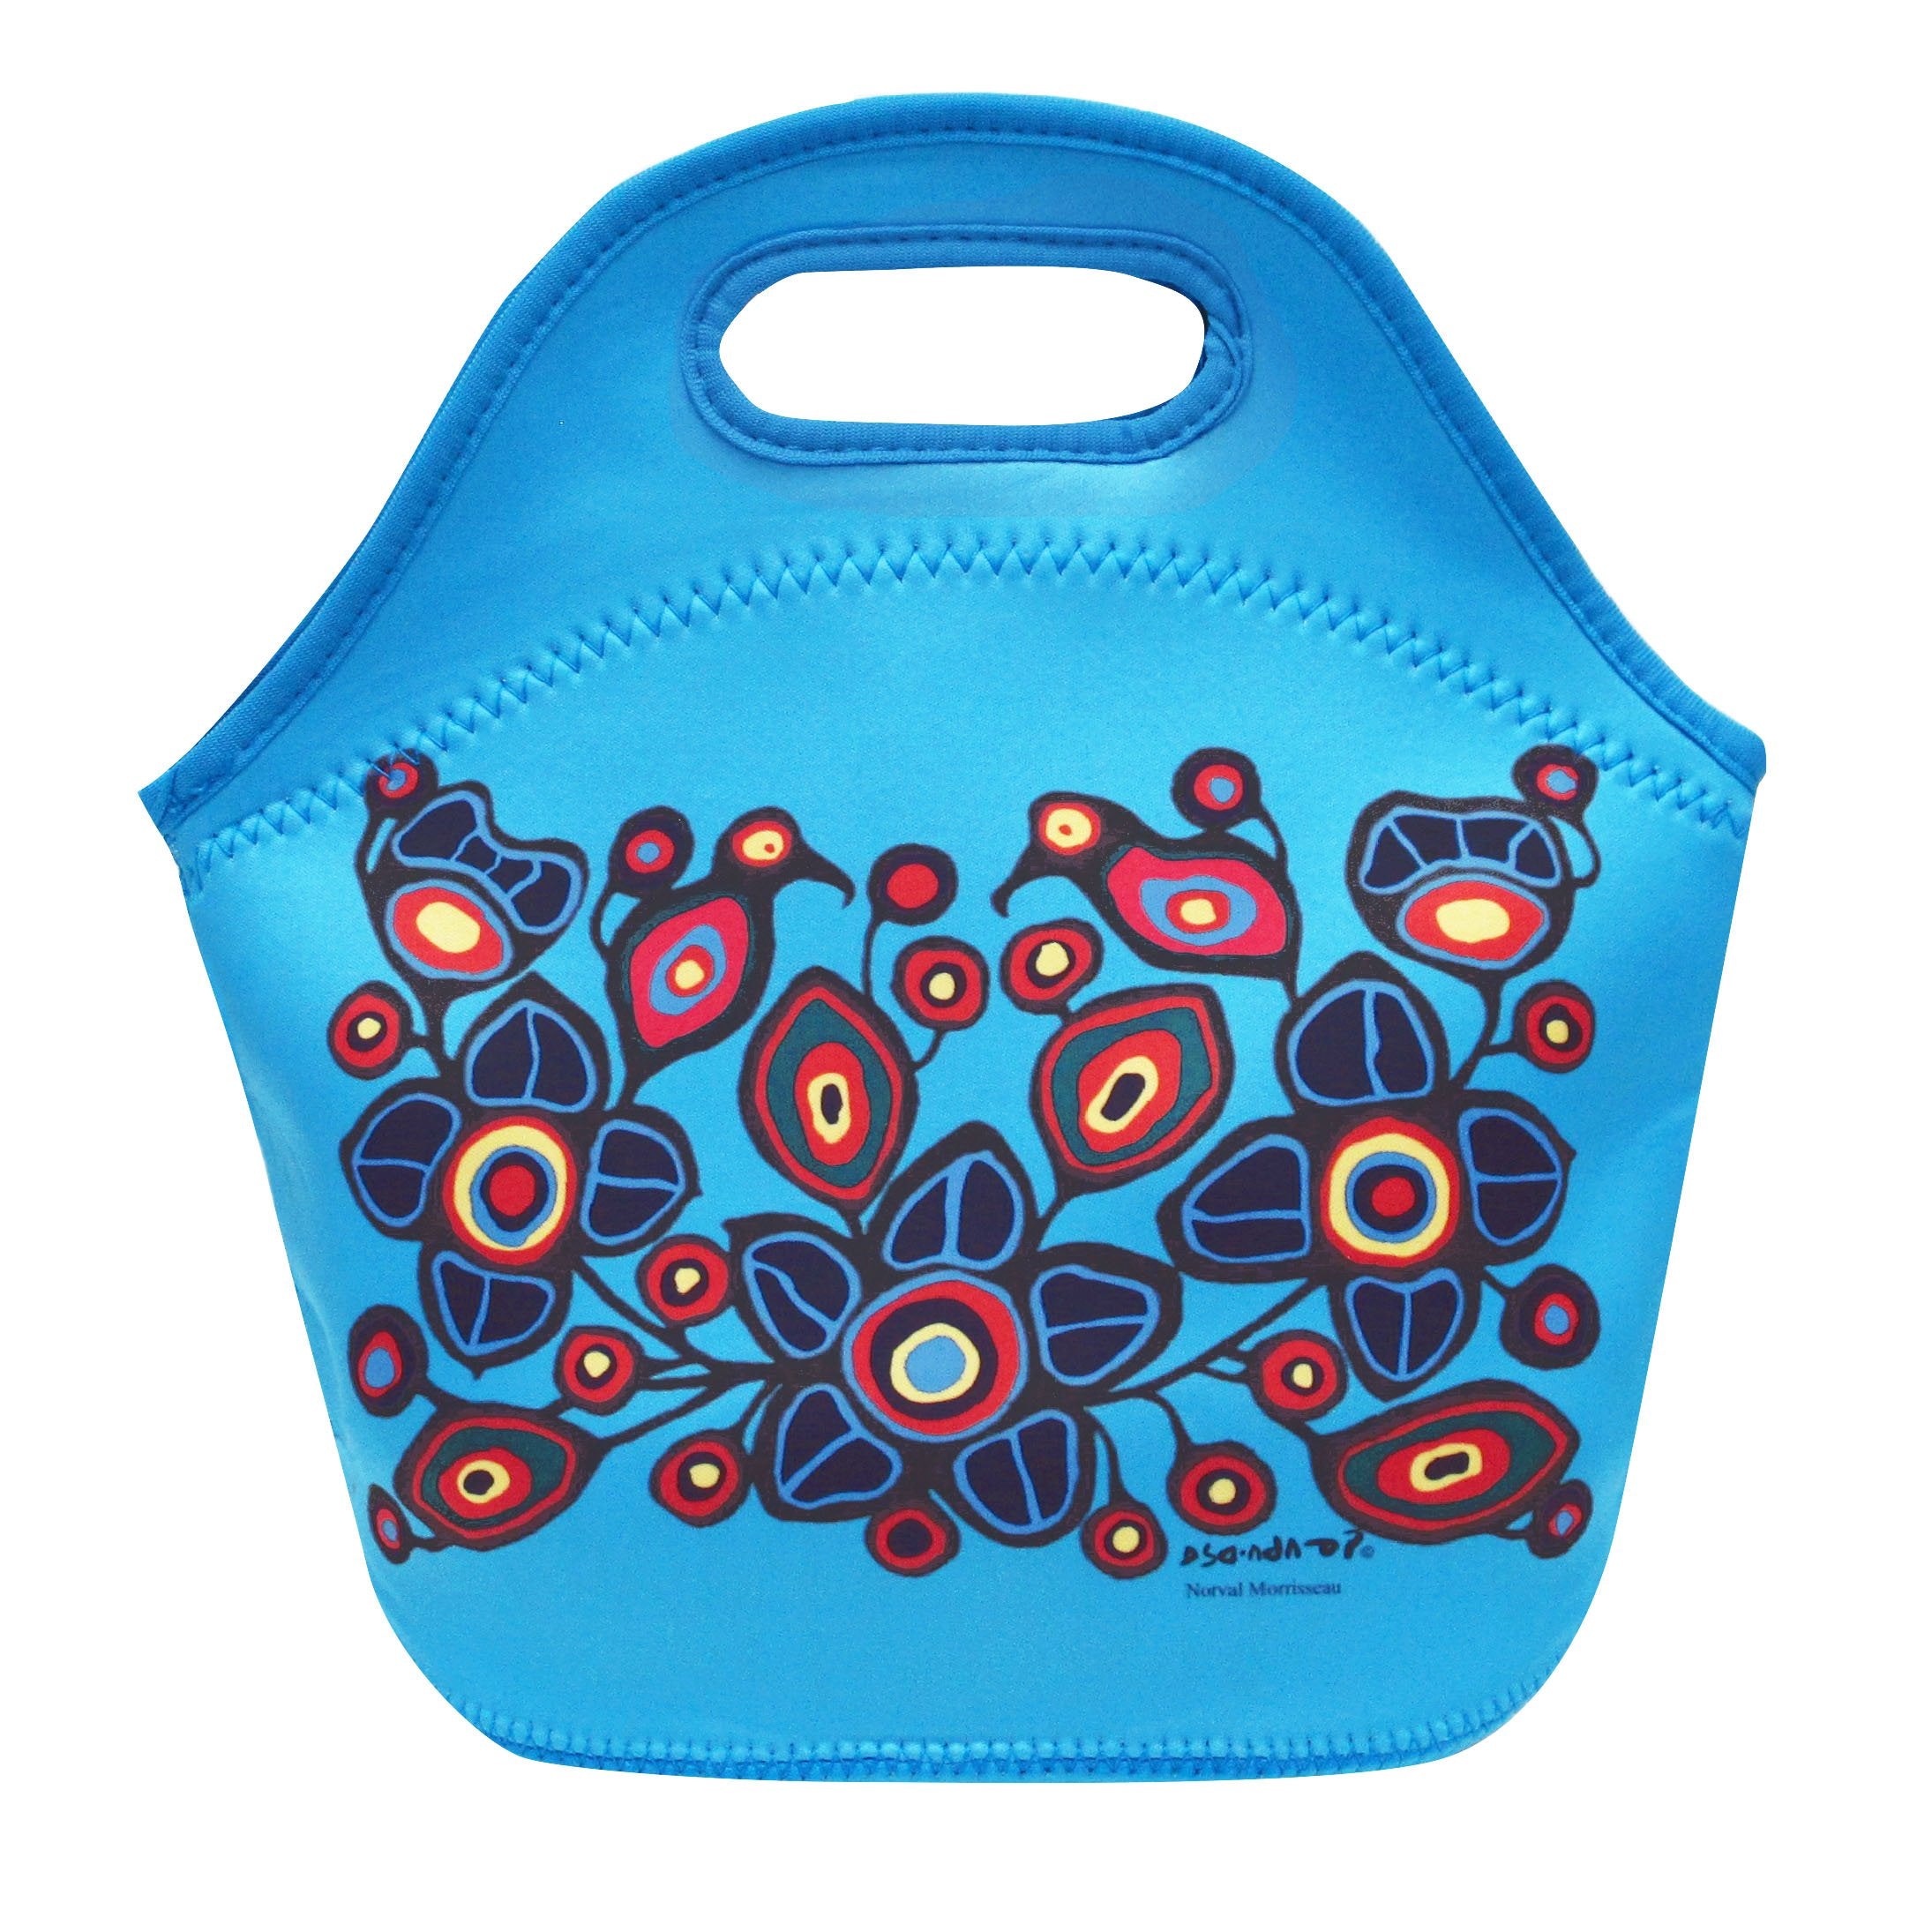 Norval Morrisseau Flowers and Birds Insulated Lunch Bag - Oscardo